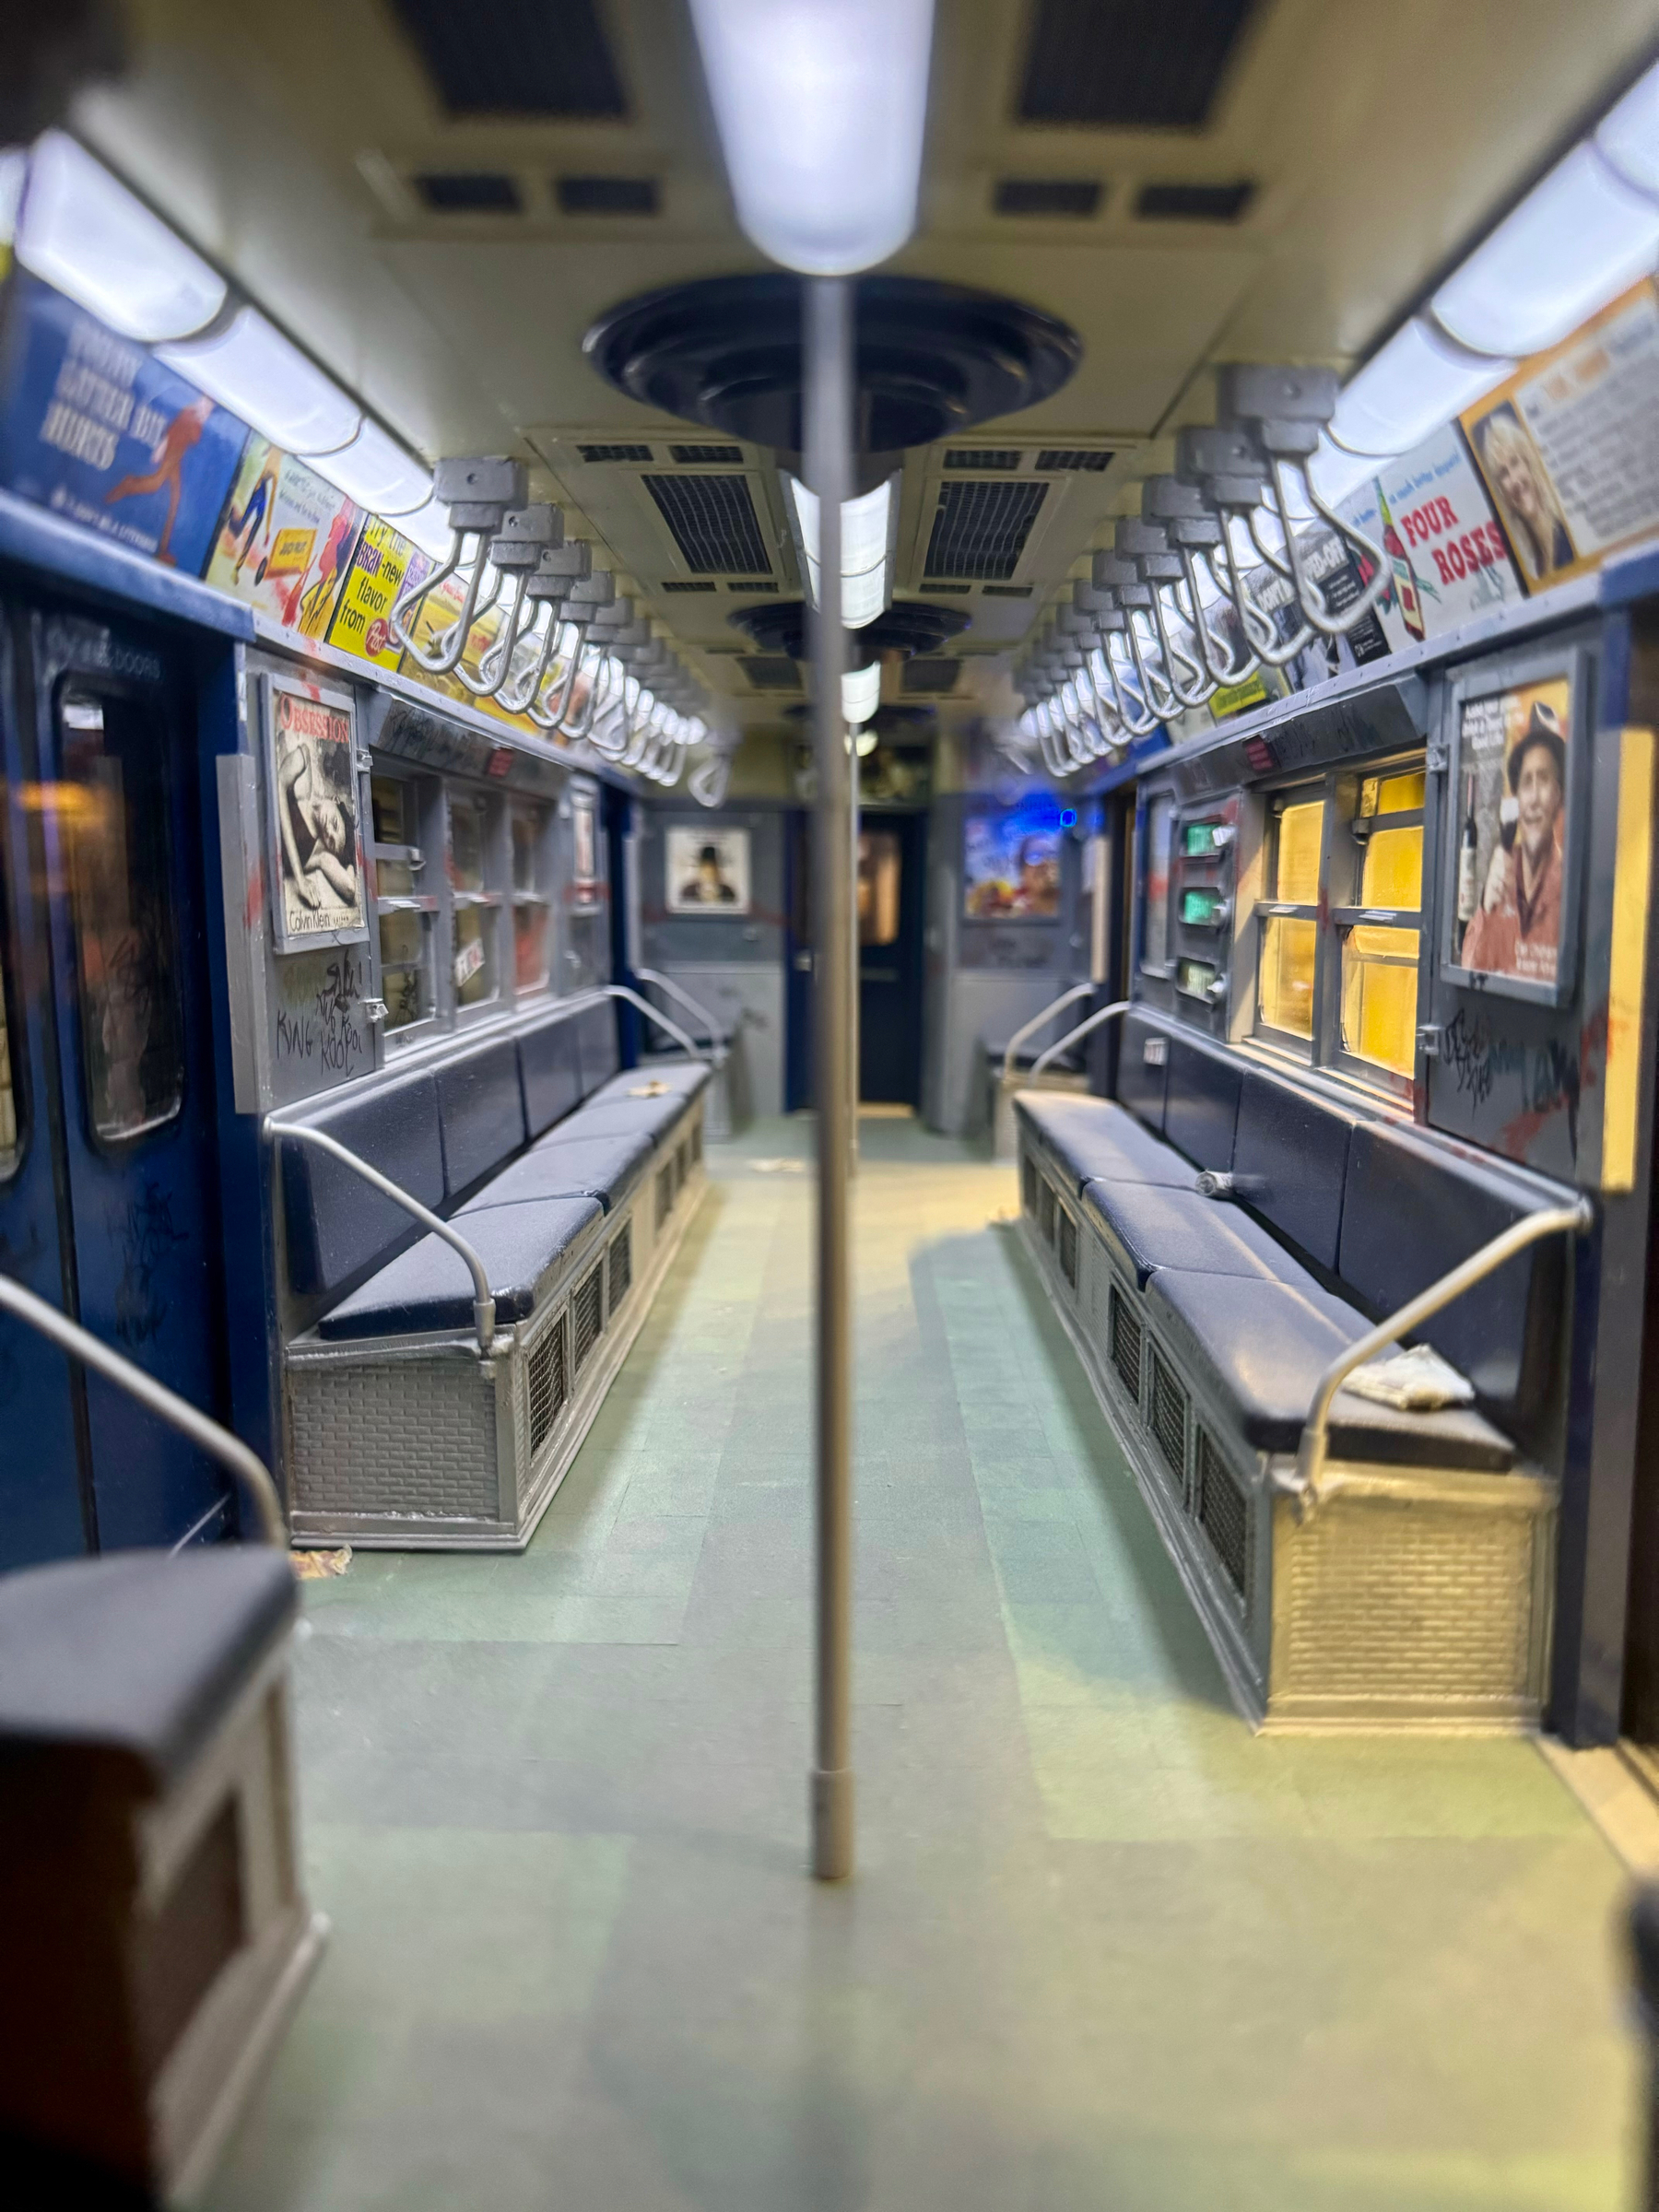 Interior of an empty subway car with benches, handrails, advertisements, and overhead lighting.